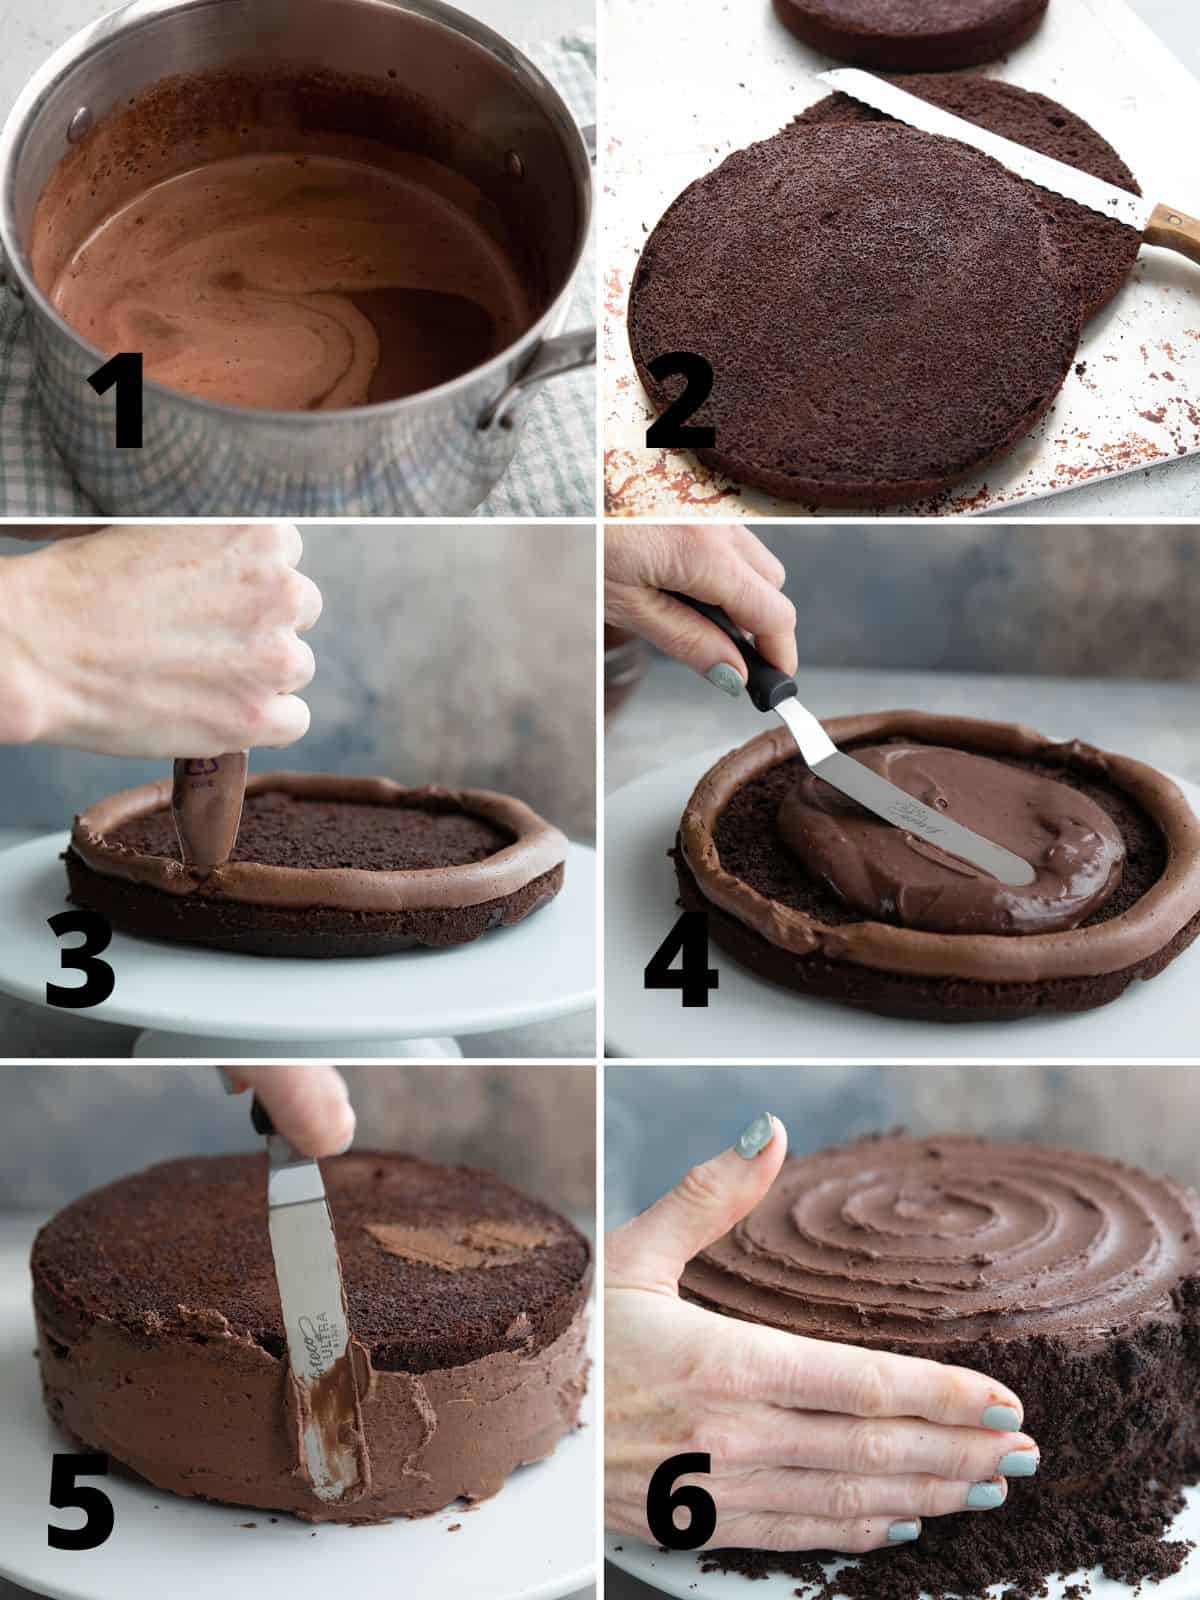 A collage of 6 images showing how to make Keto Chocolate Blackout Cake.